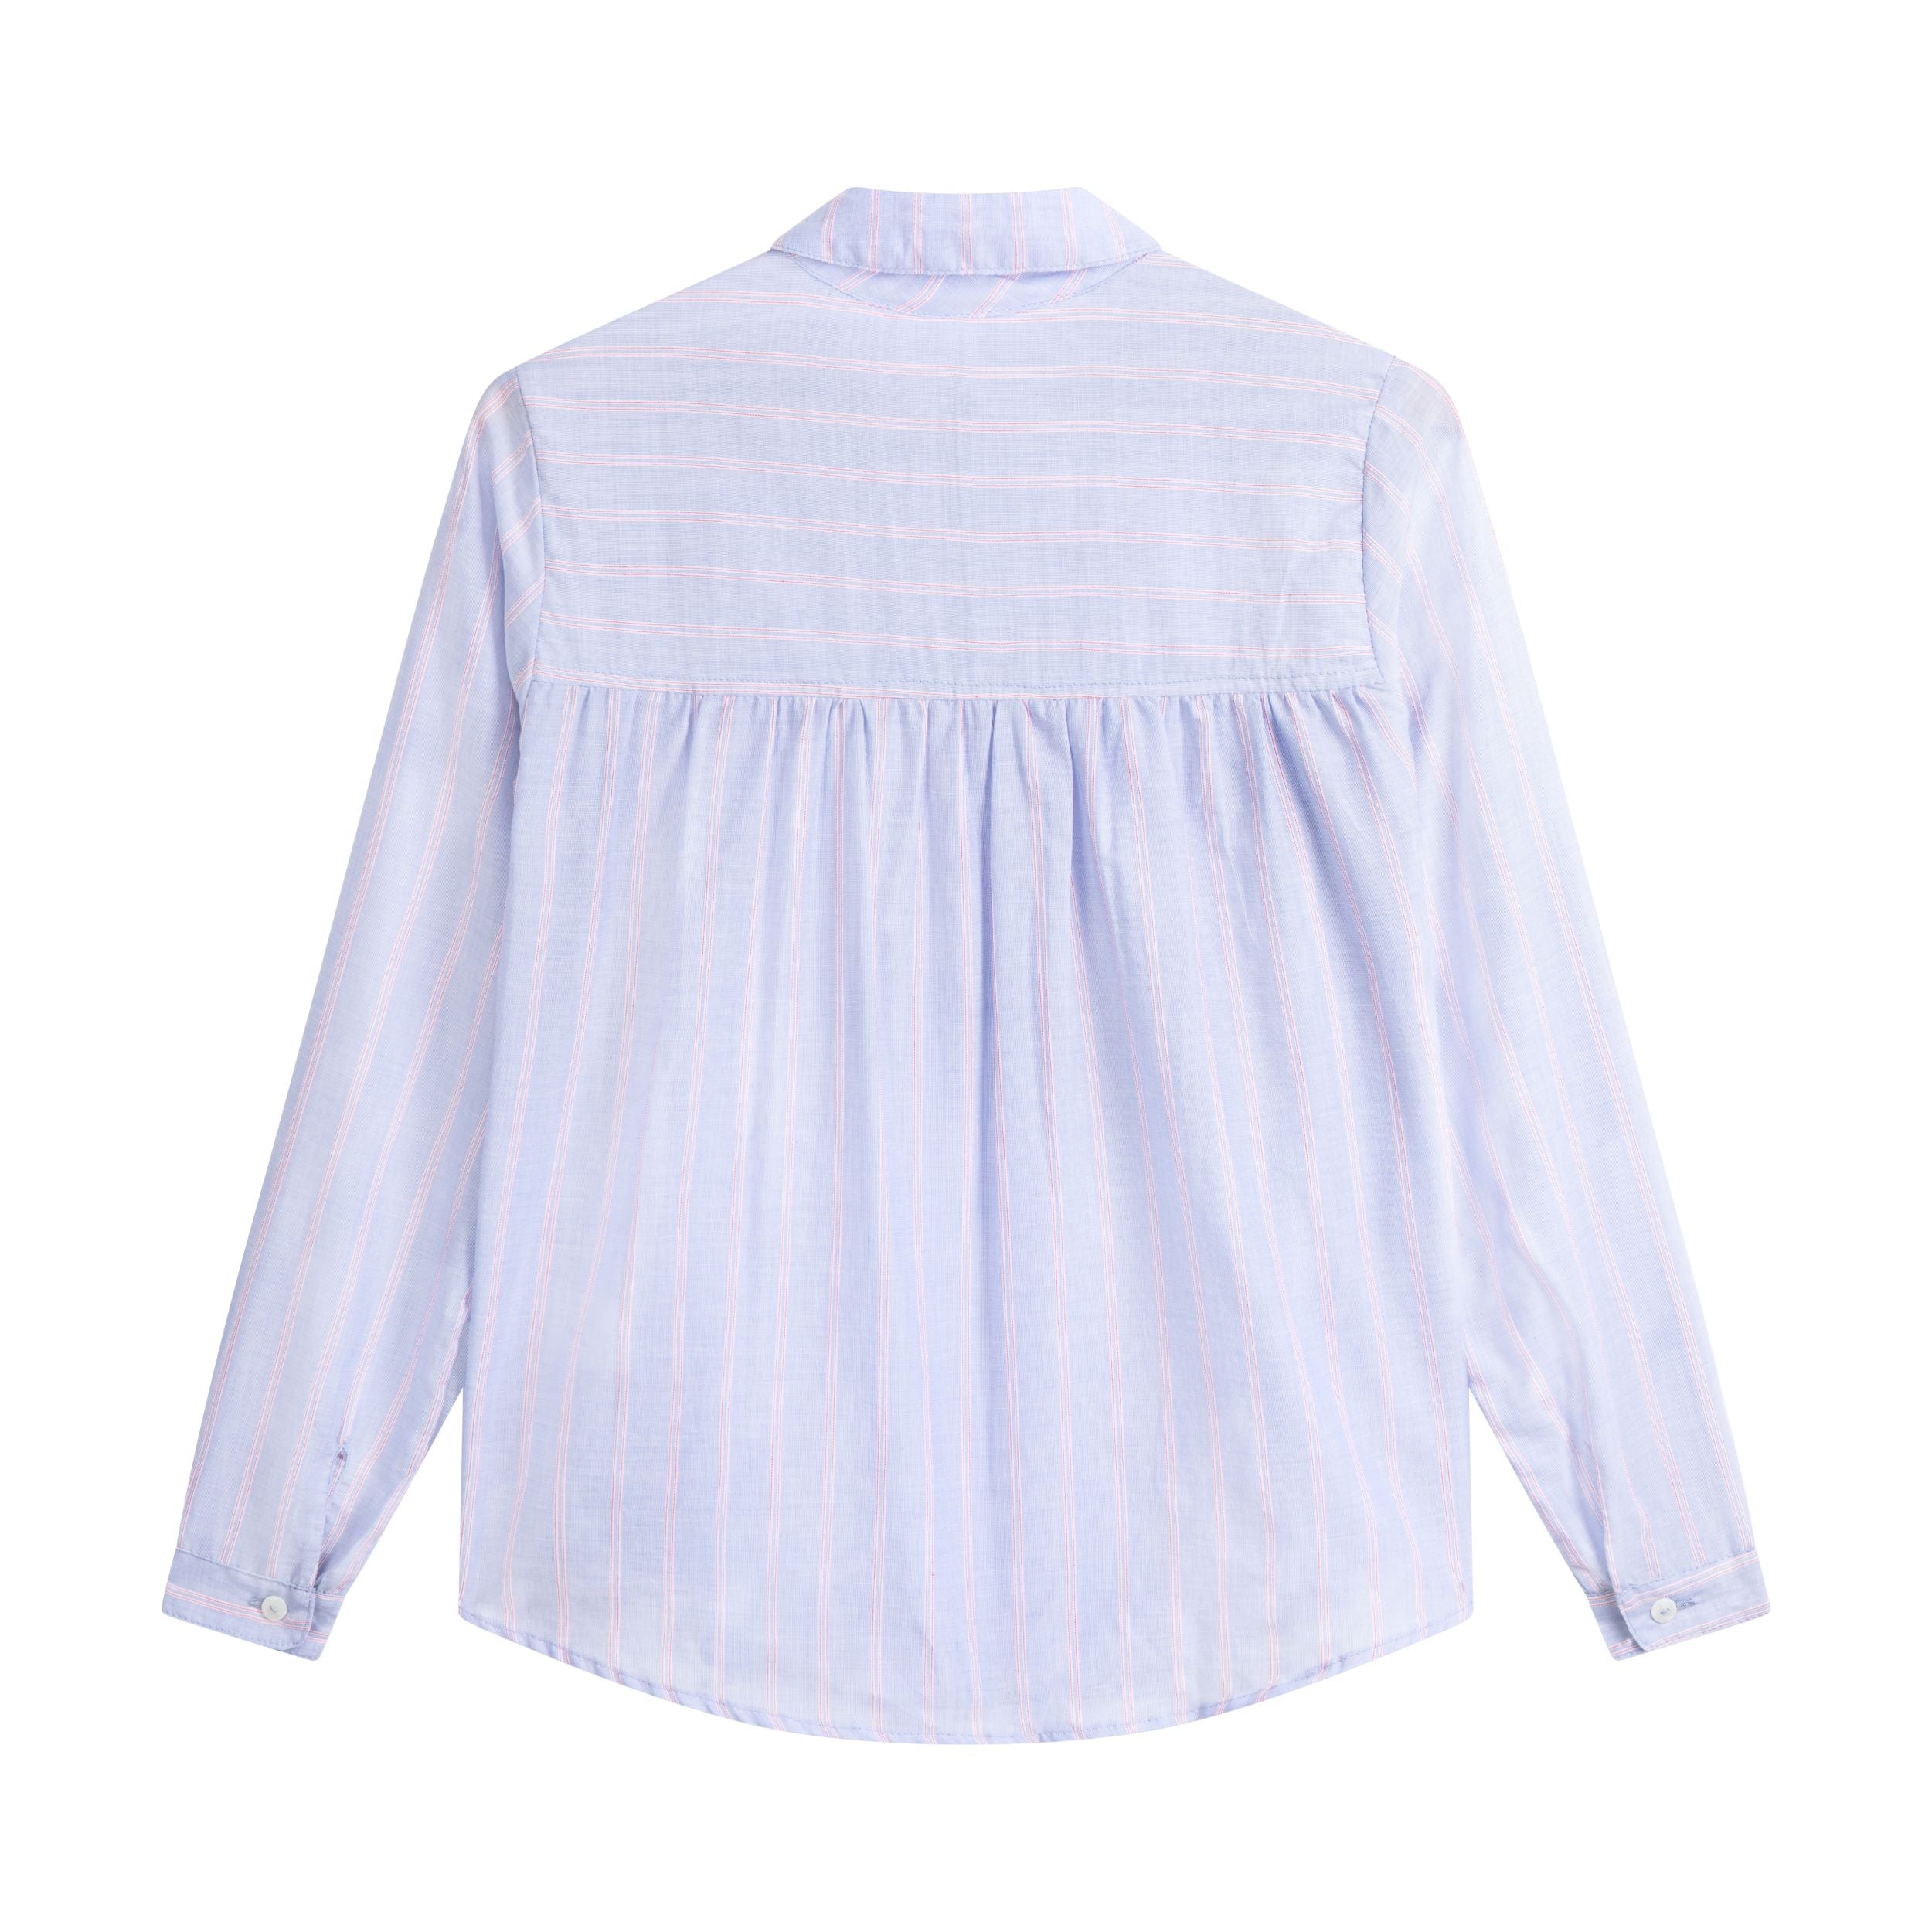 Carrier Company Long Sleeved Blouse in Blue and Red Stripe